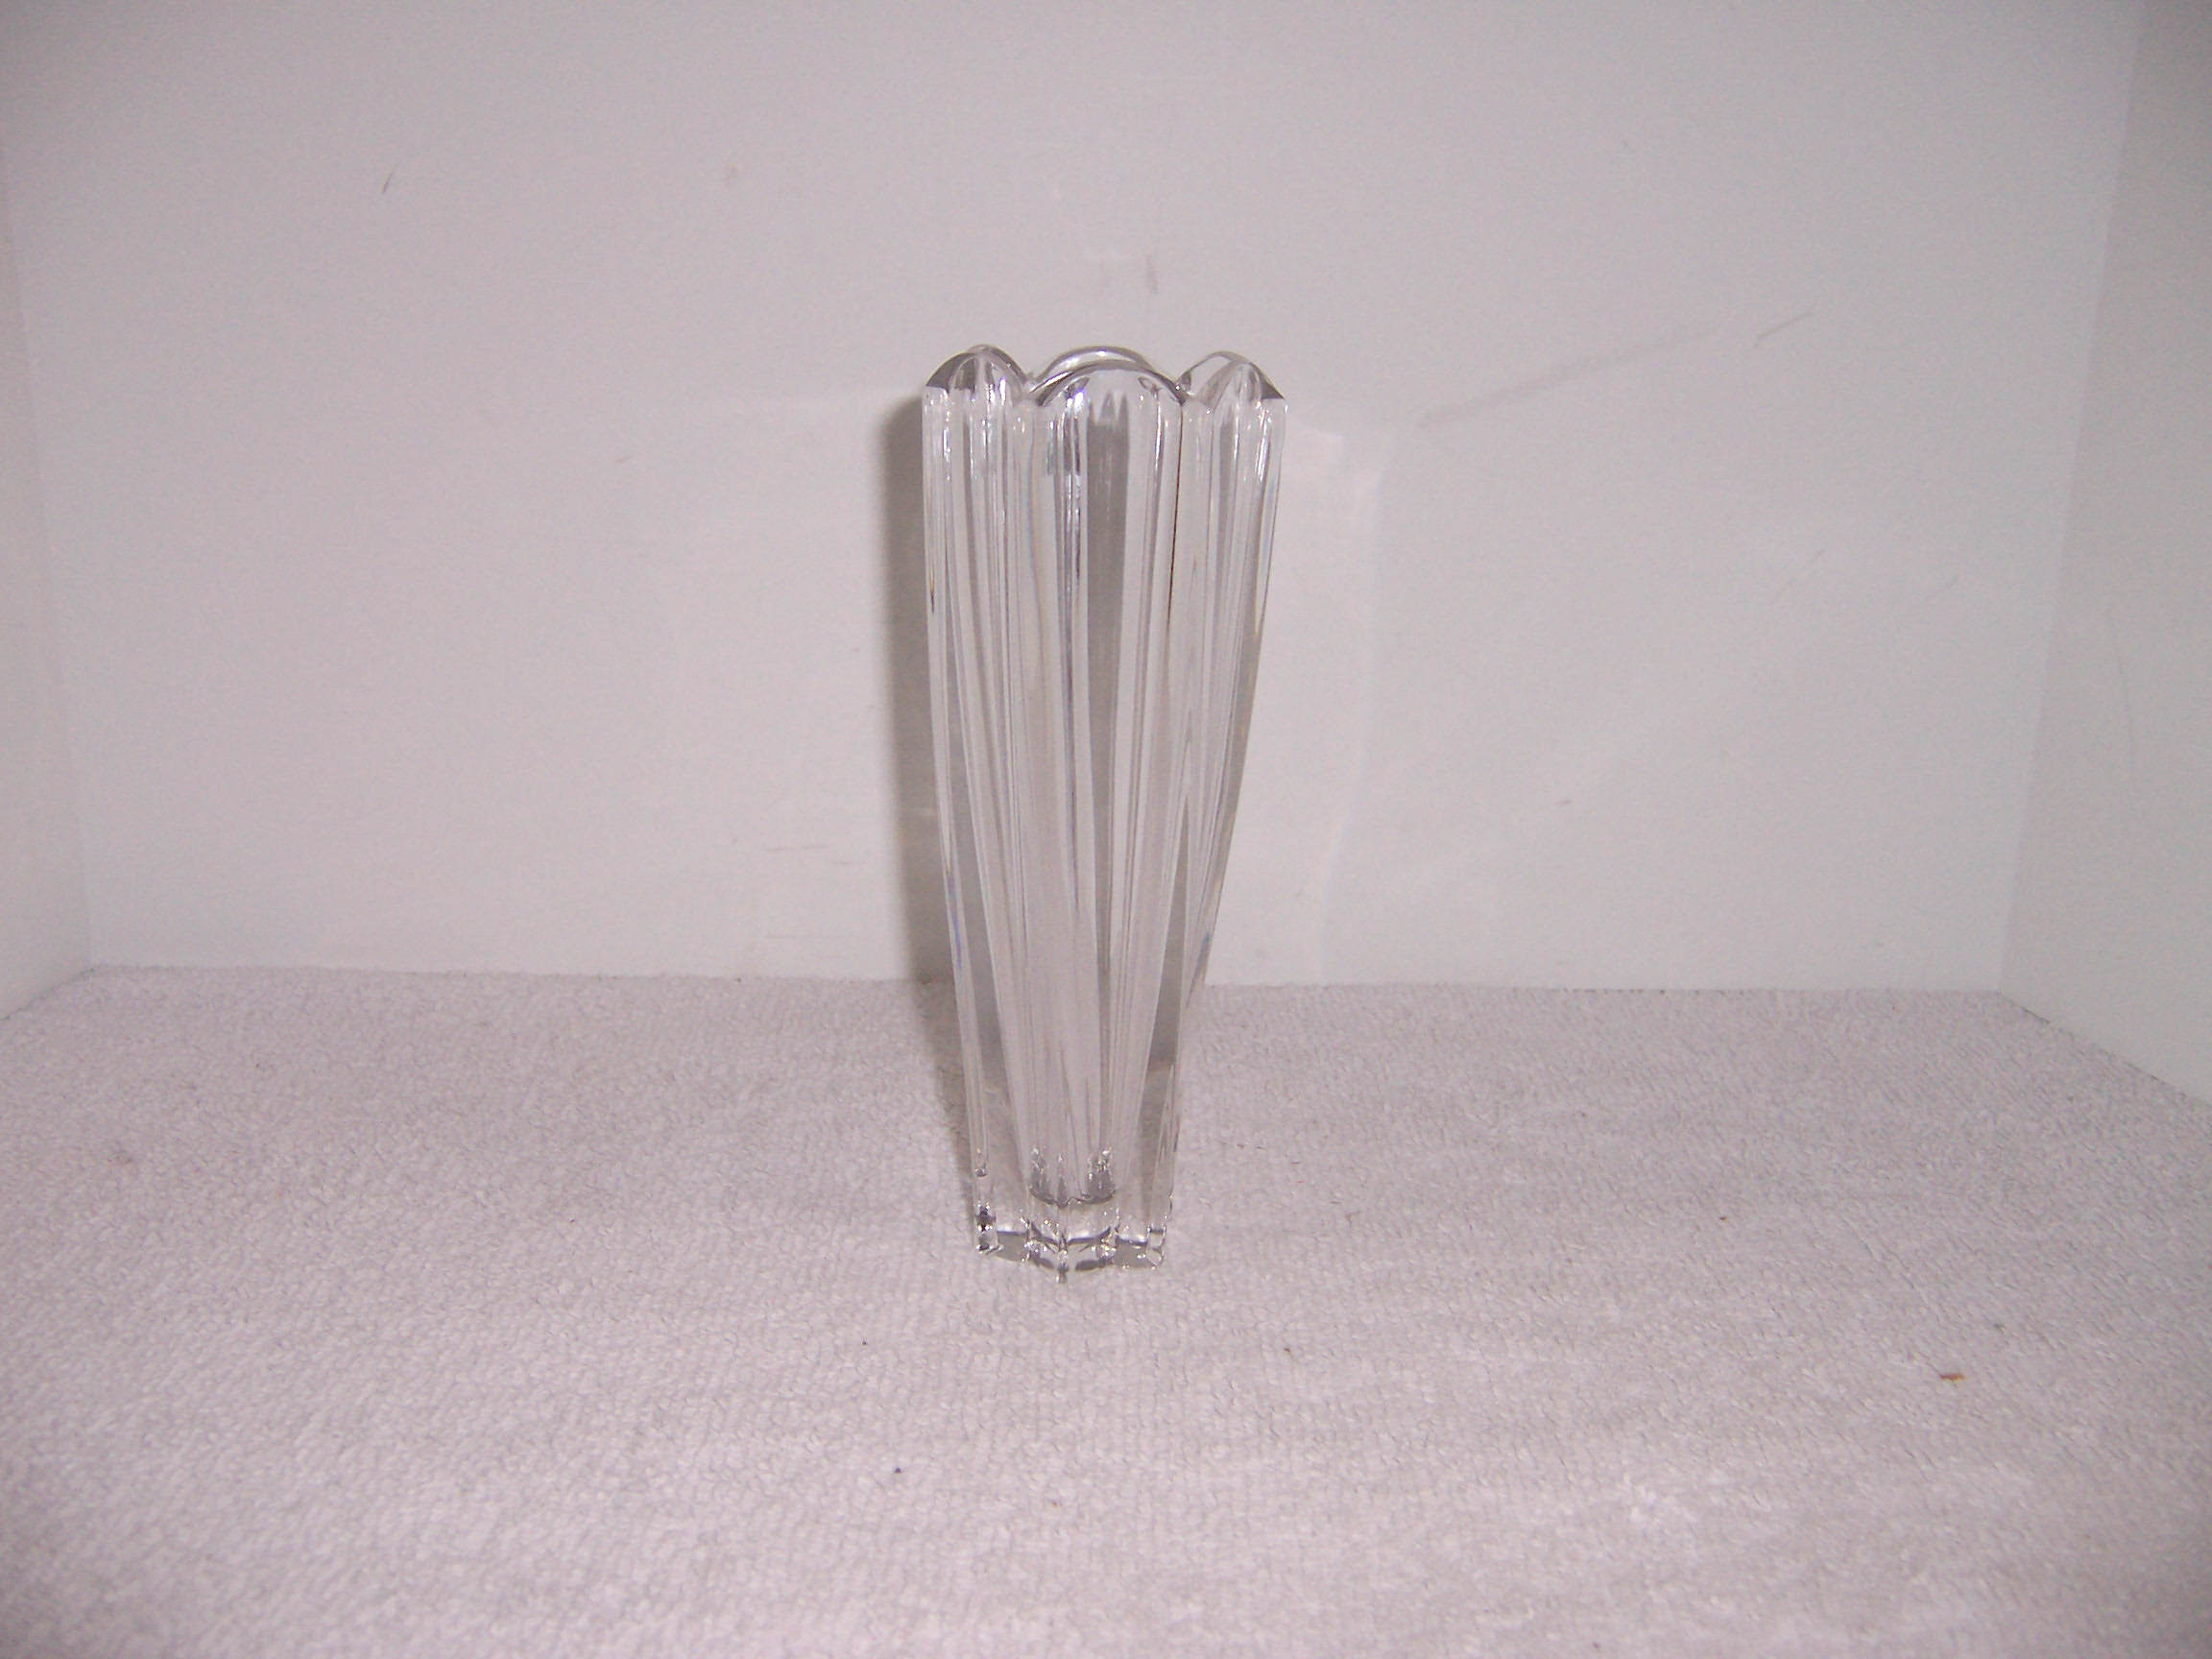 26 Lovable Marquis by Waterford Sheridan Flared 11 Inch Vase 2024 free download marquis by waterford sheridan flared 11 inch vase of marquis vase by waterford vase and cellar image avorcor com pertaining to marquis waterford wild flower crystal vase triple a re